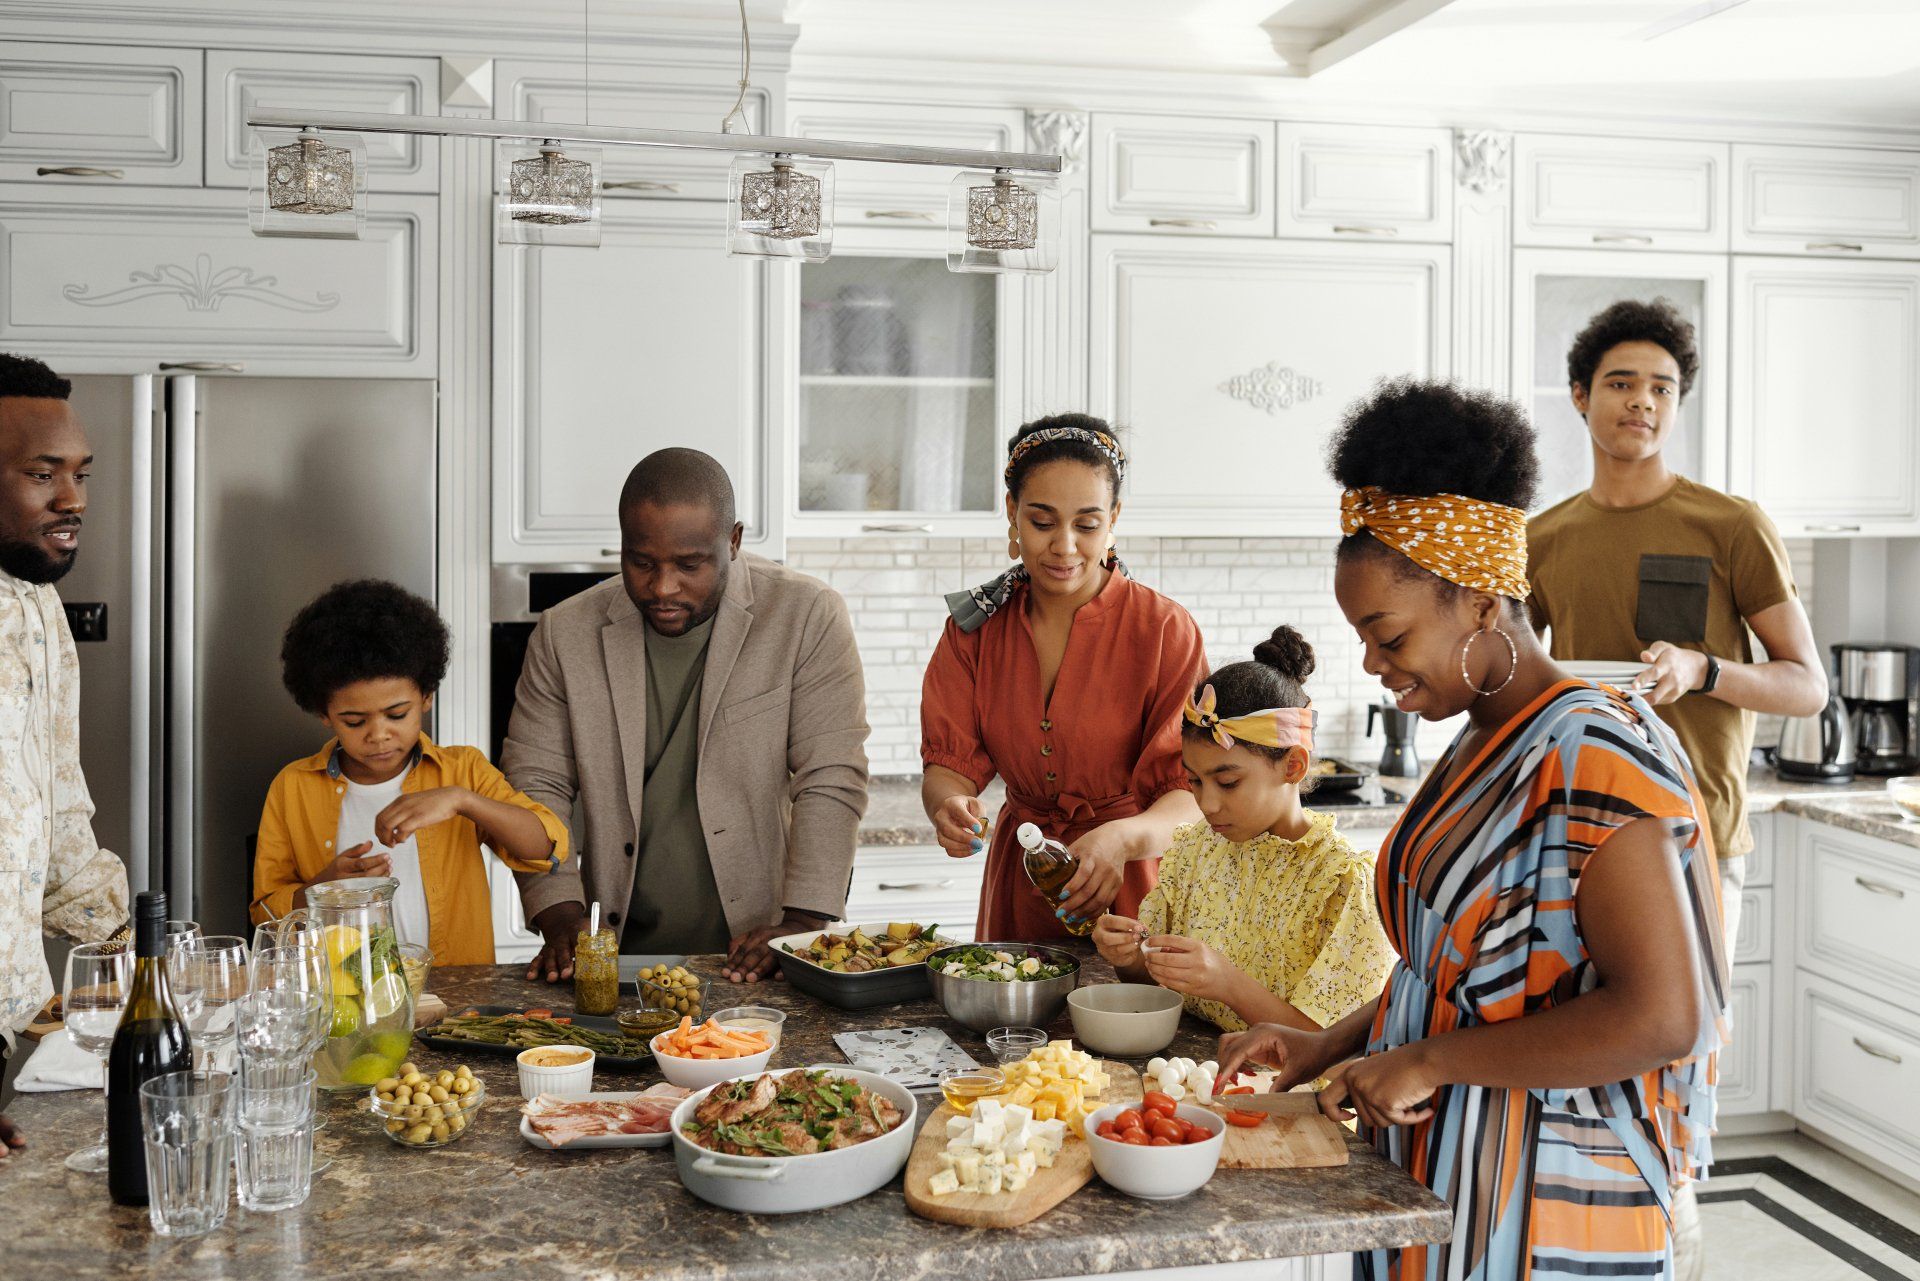 A family is preparing food together in a kitchen.